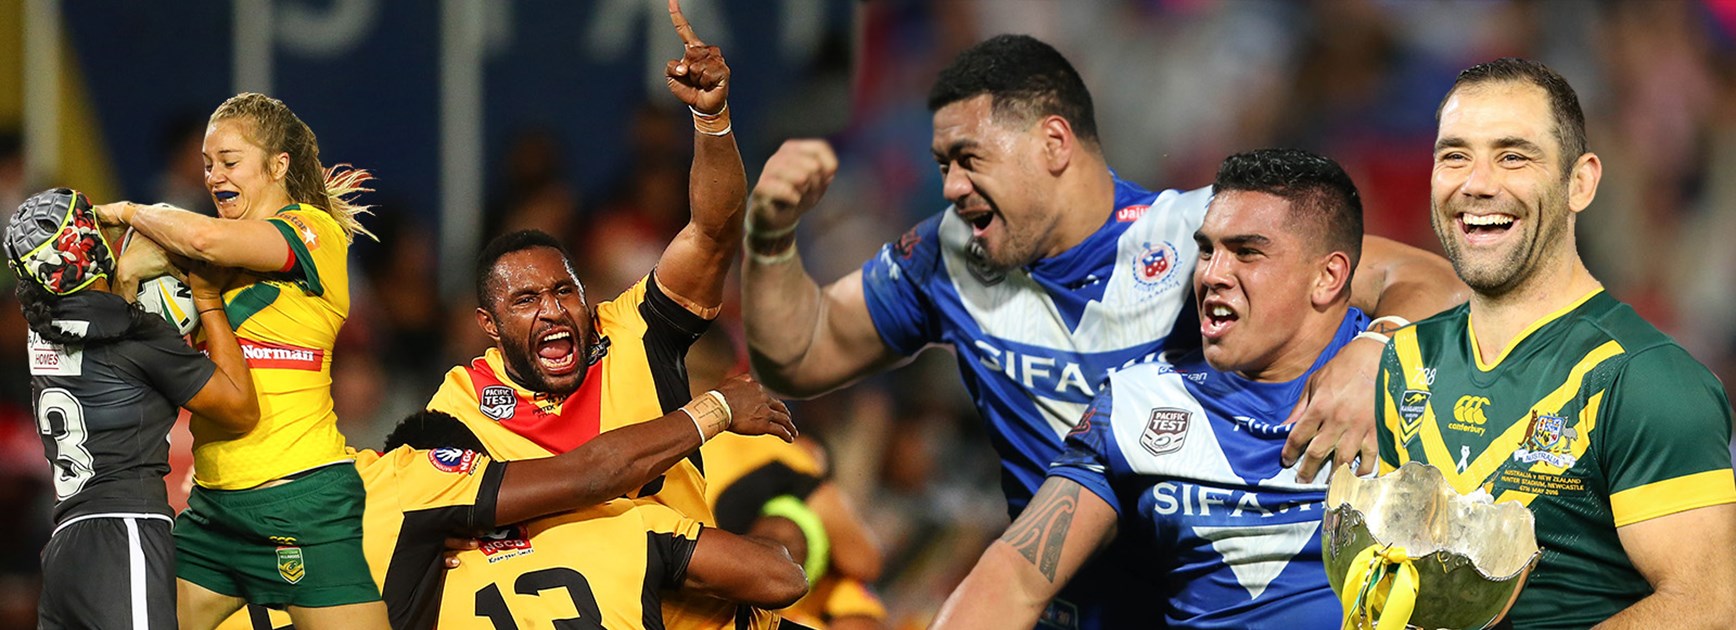 There was plenty of excitement and passion as international rugby league took center stage.